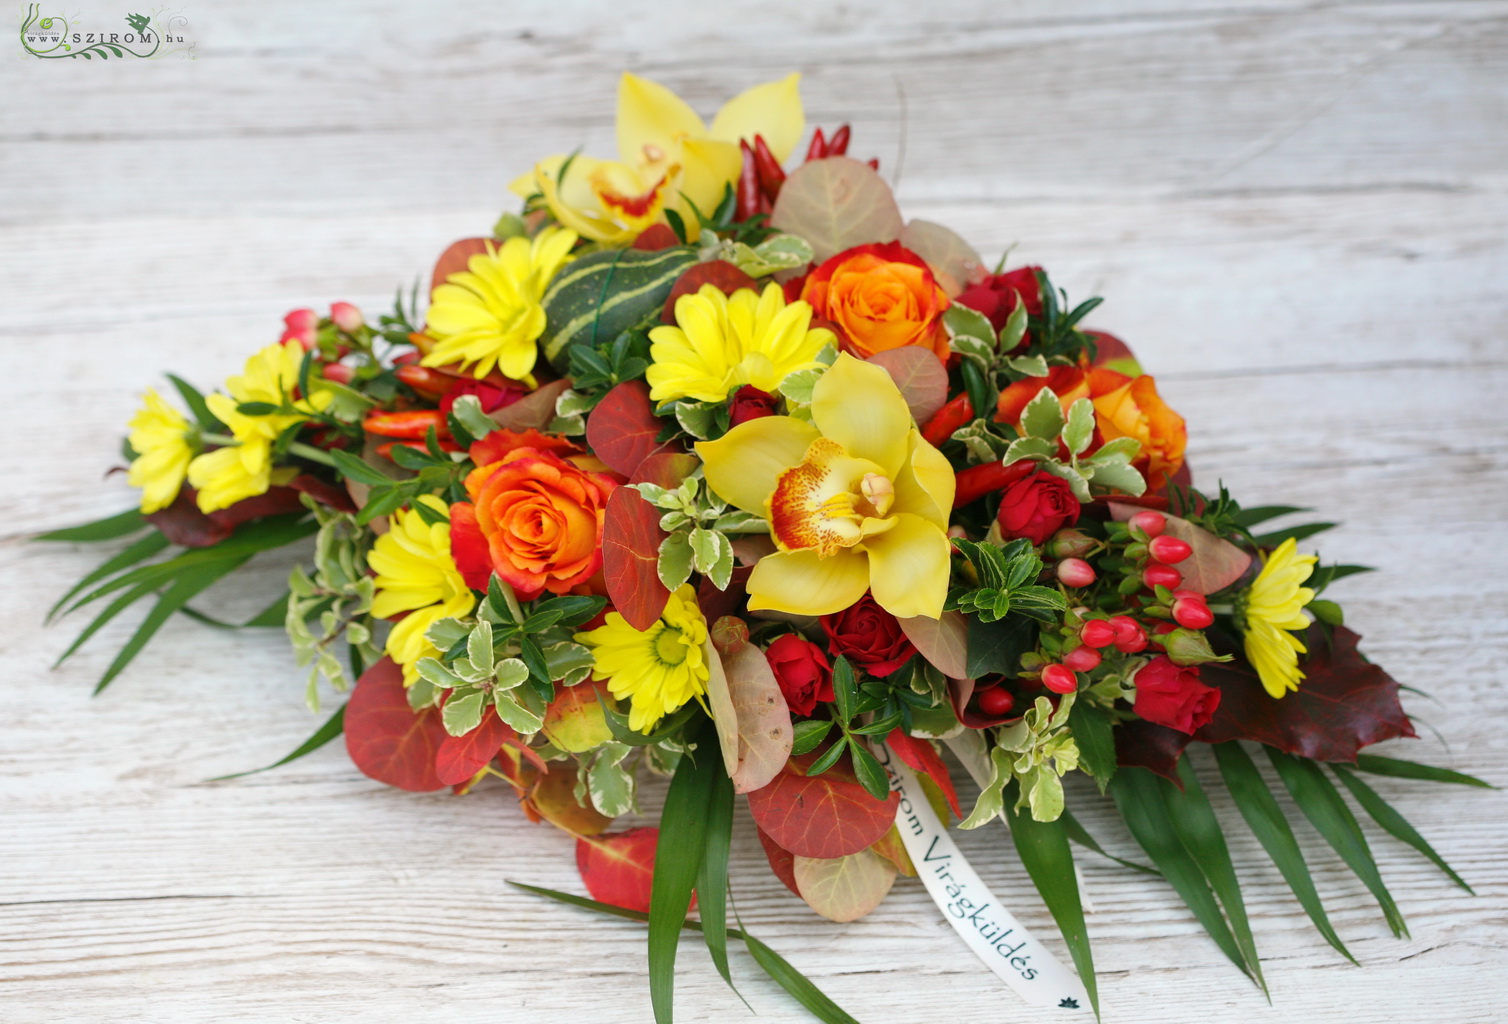 flower delivery Budapest - Main table centerpiece with passion flowers (orchid, rose, bushy rose, hypericum, chrysanthemum, yellow, orange), wedding